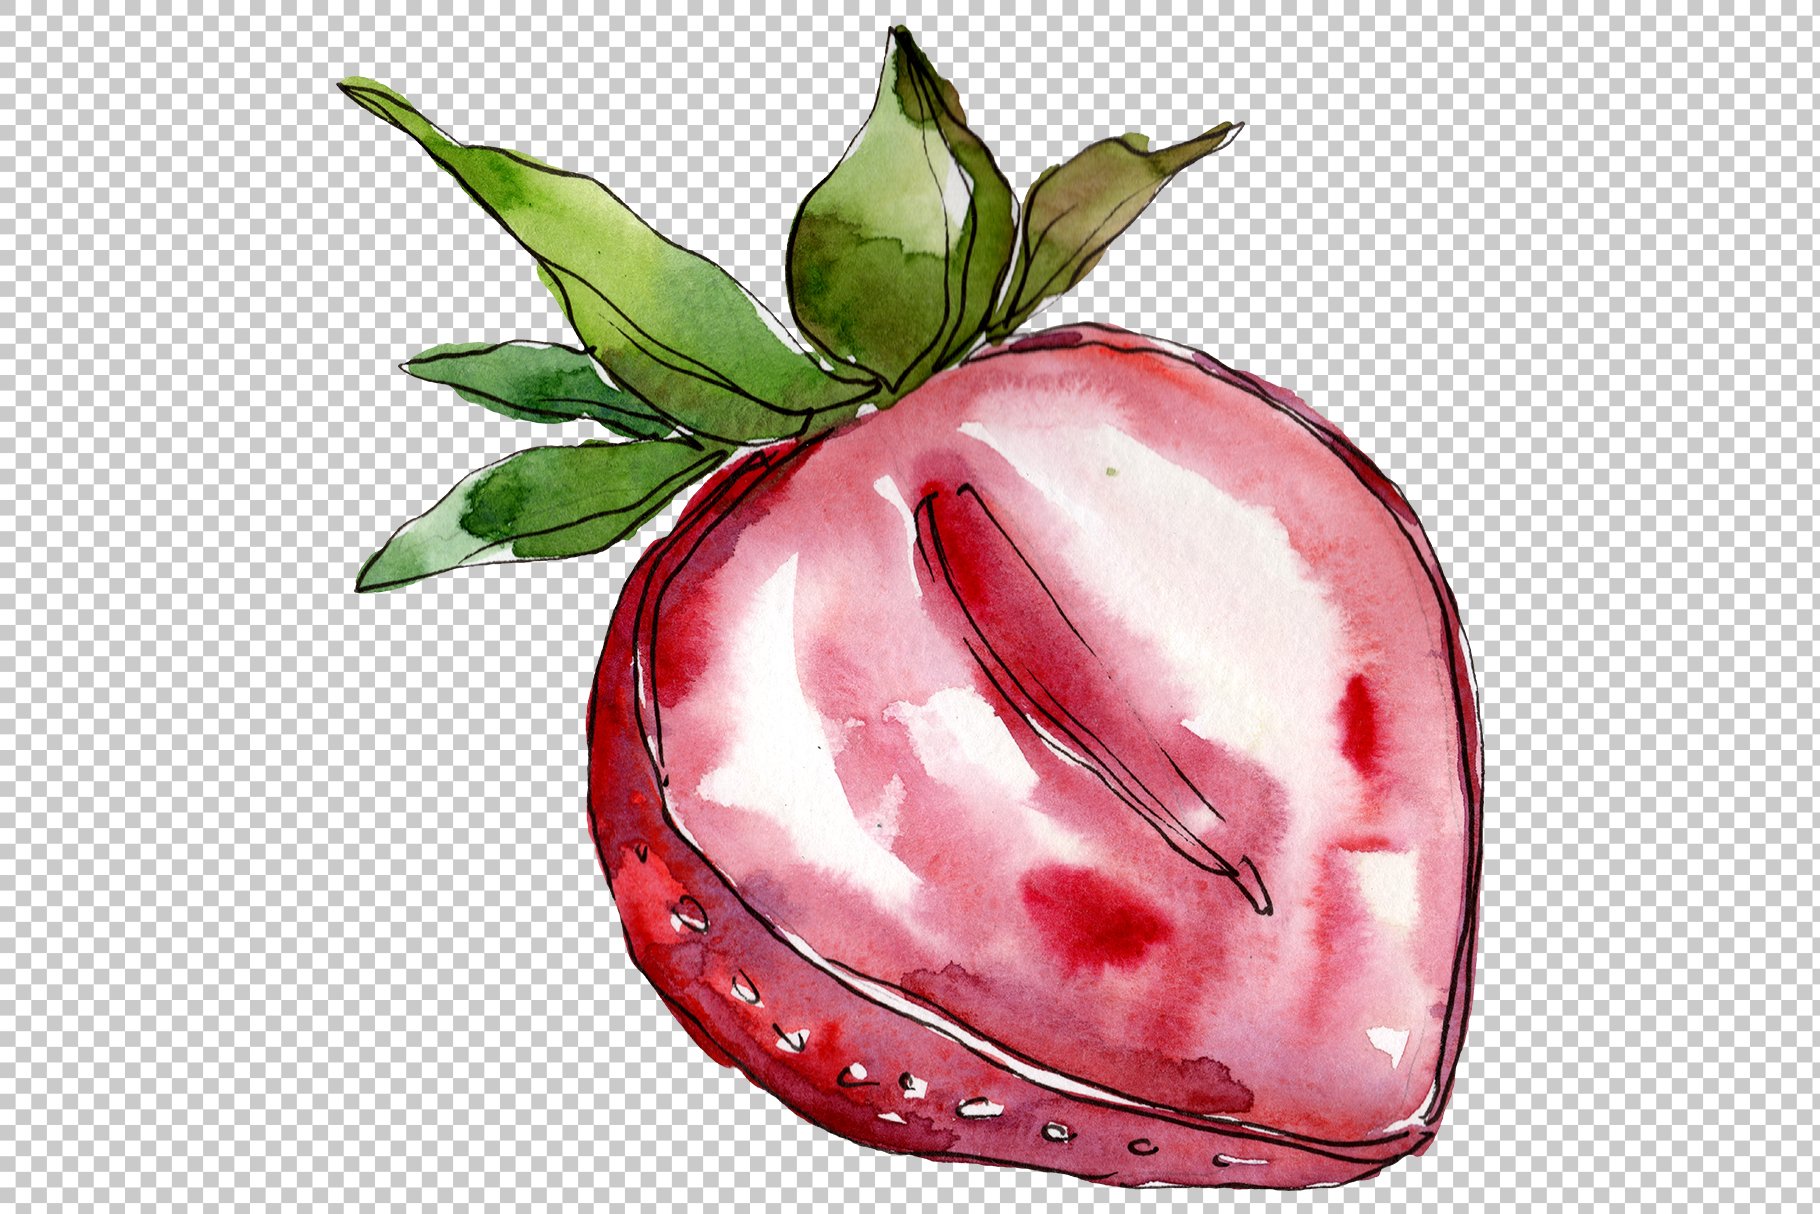 Transparent background with a half of strawberry.